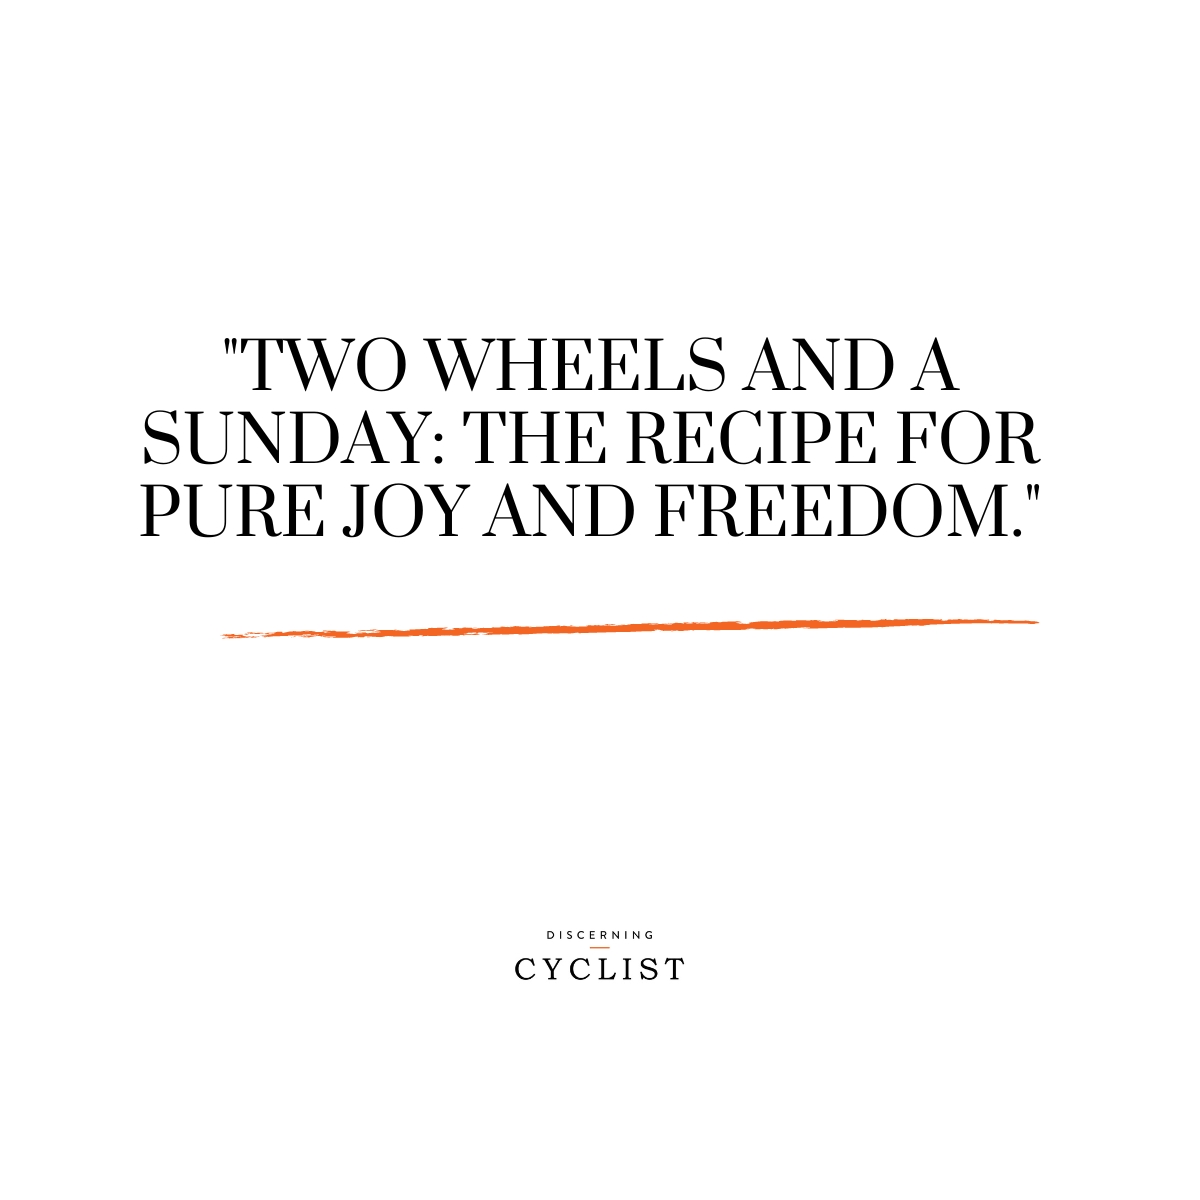 "Two wheels and a Sunday: the recipe for pure joy and freedom."